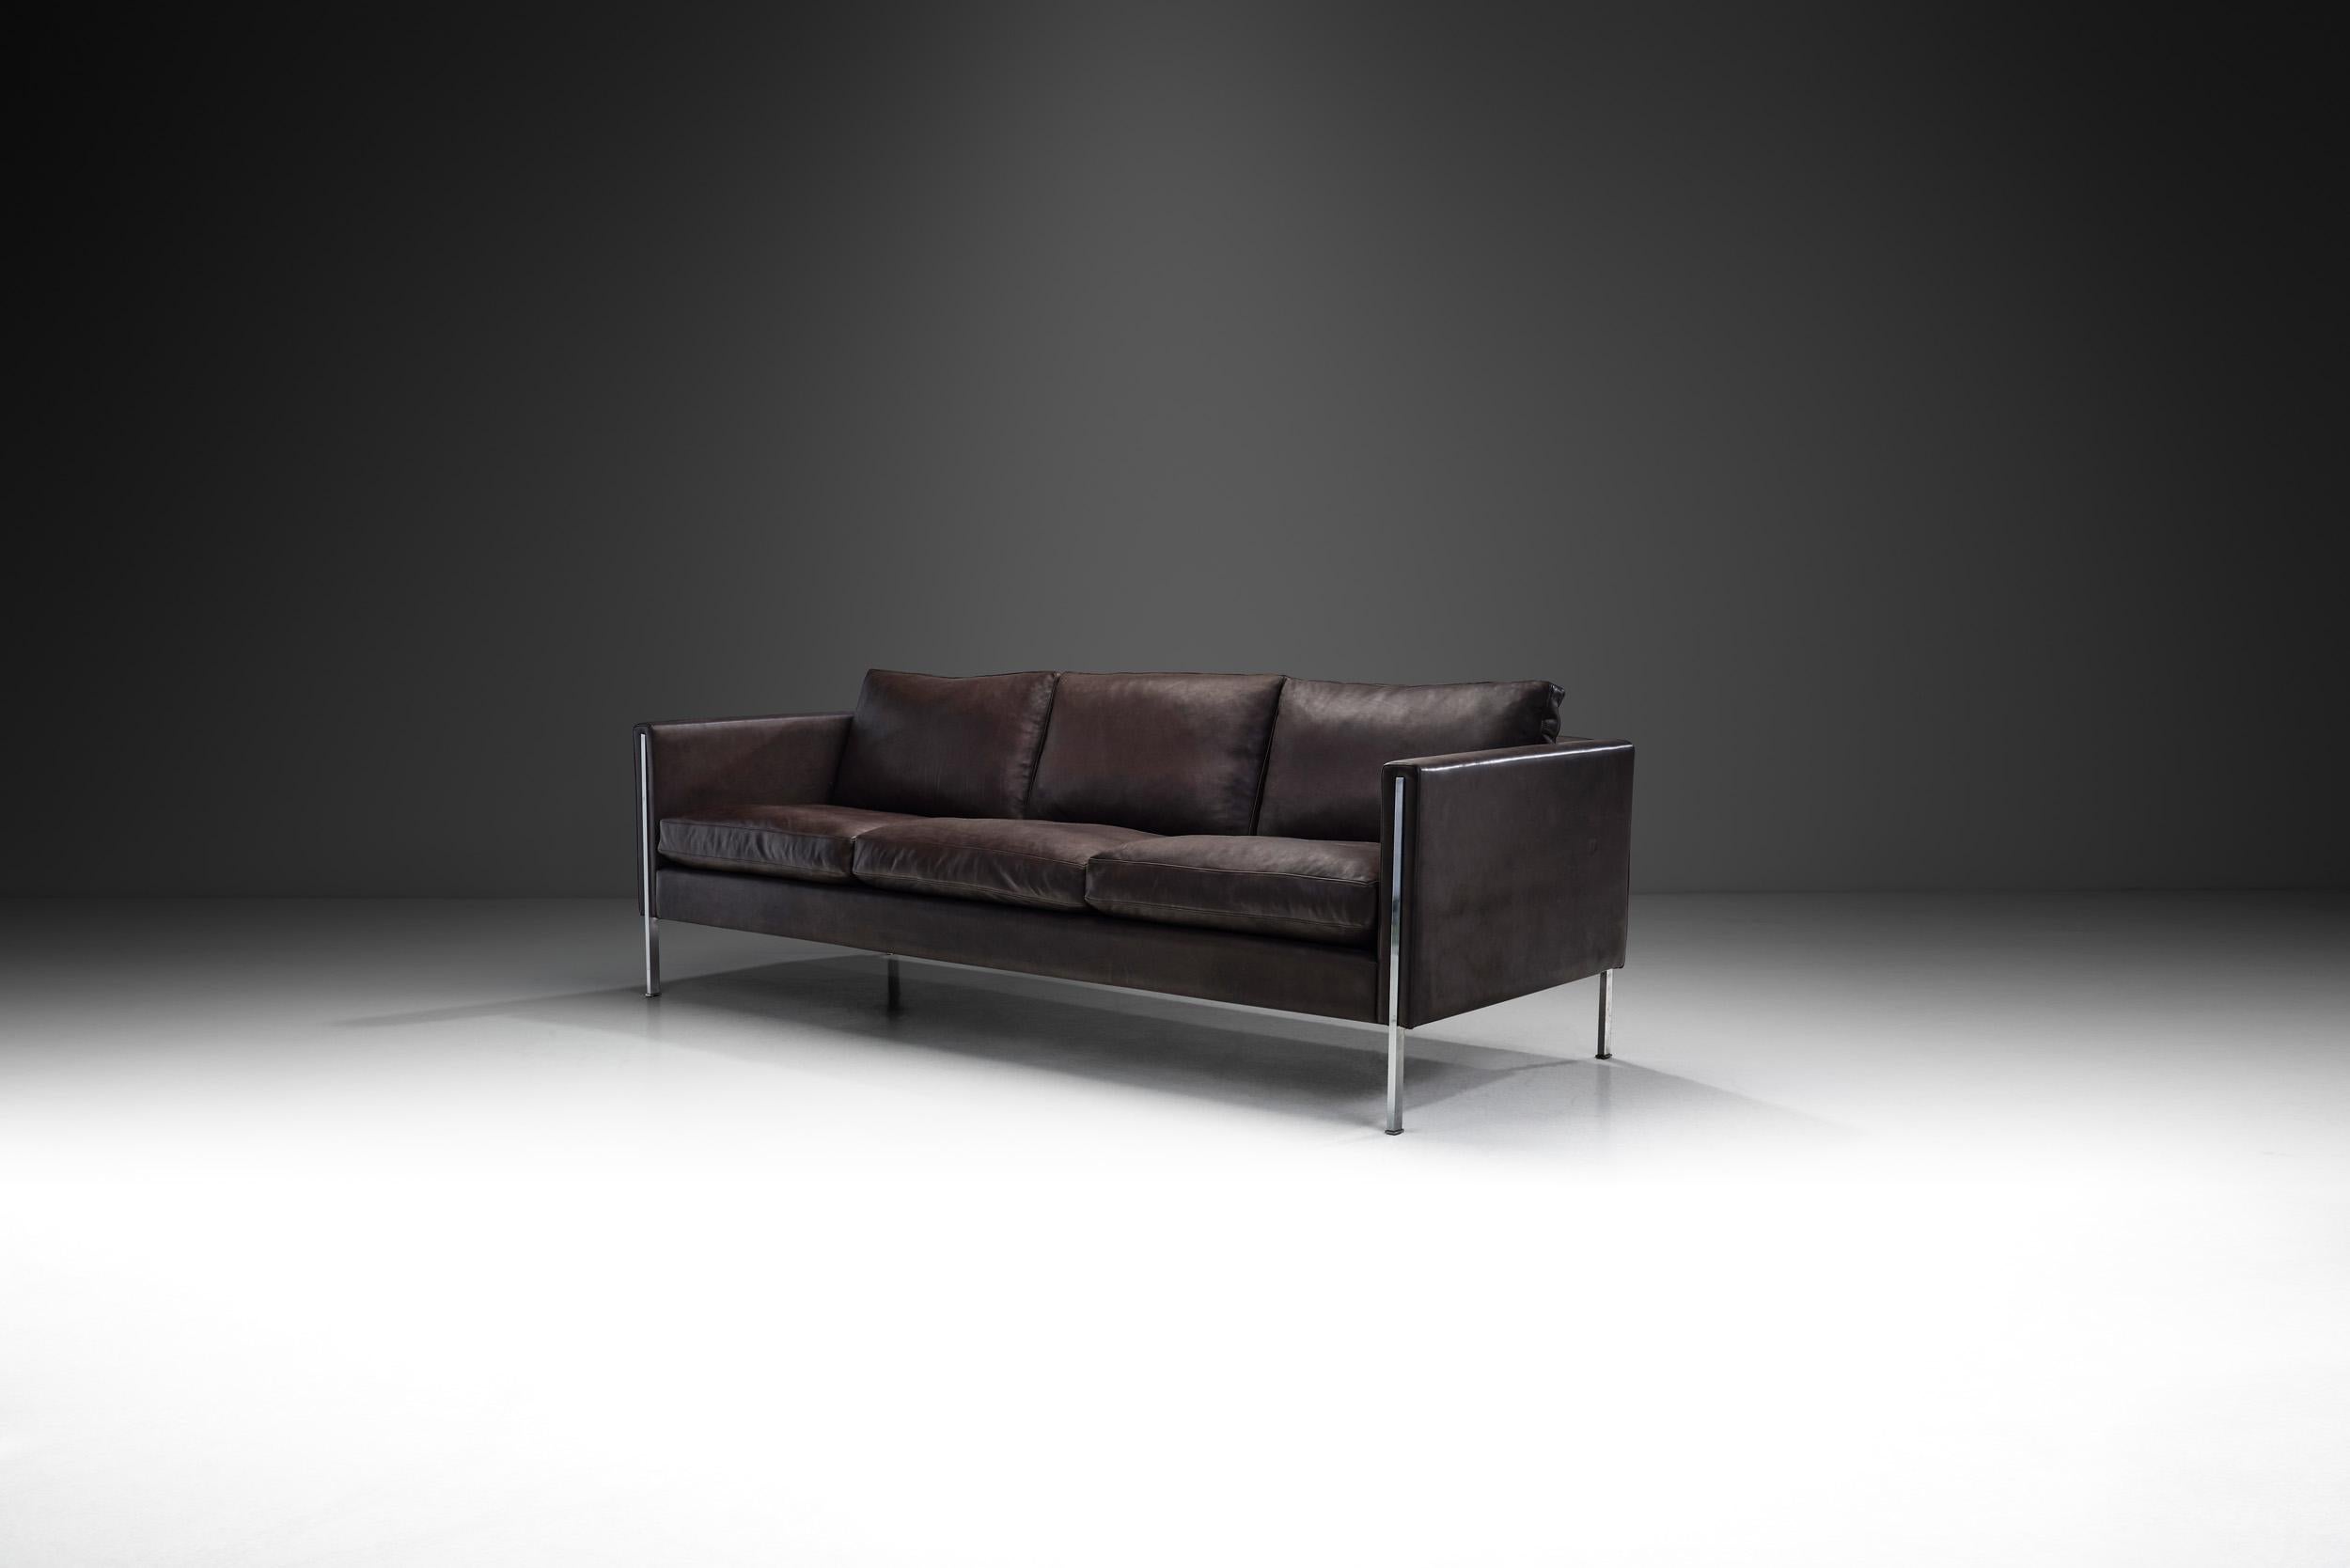 Much has been said about this sofa model, but one thing is for sure: this 1962 classic was way ahead of its time in terms of design. An iconic designer of the 1960s and 1970s, Pierre Paulin made a name for himself thanks to the modernity of his work